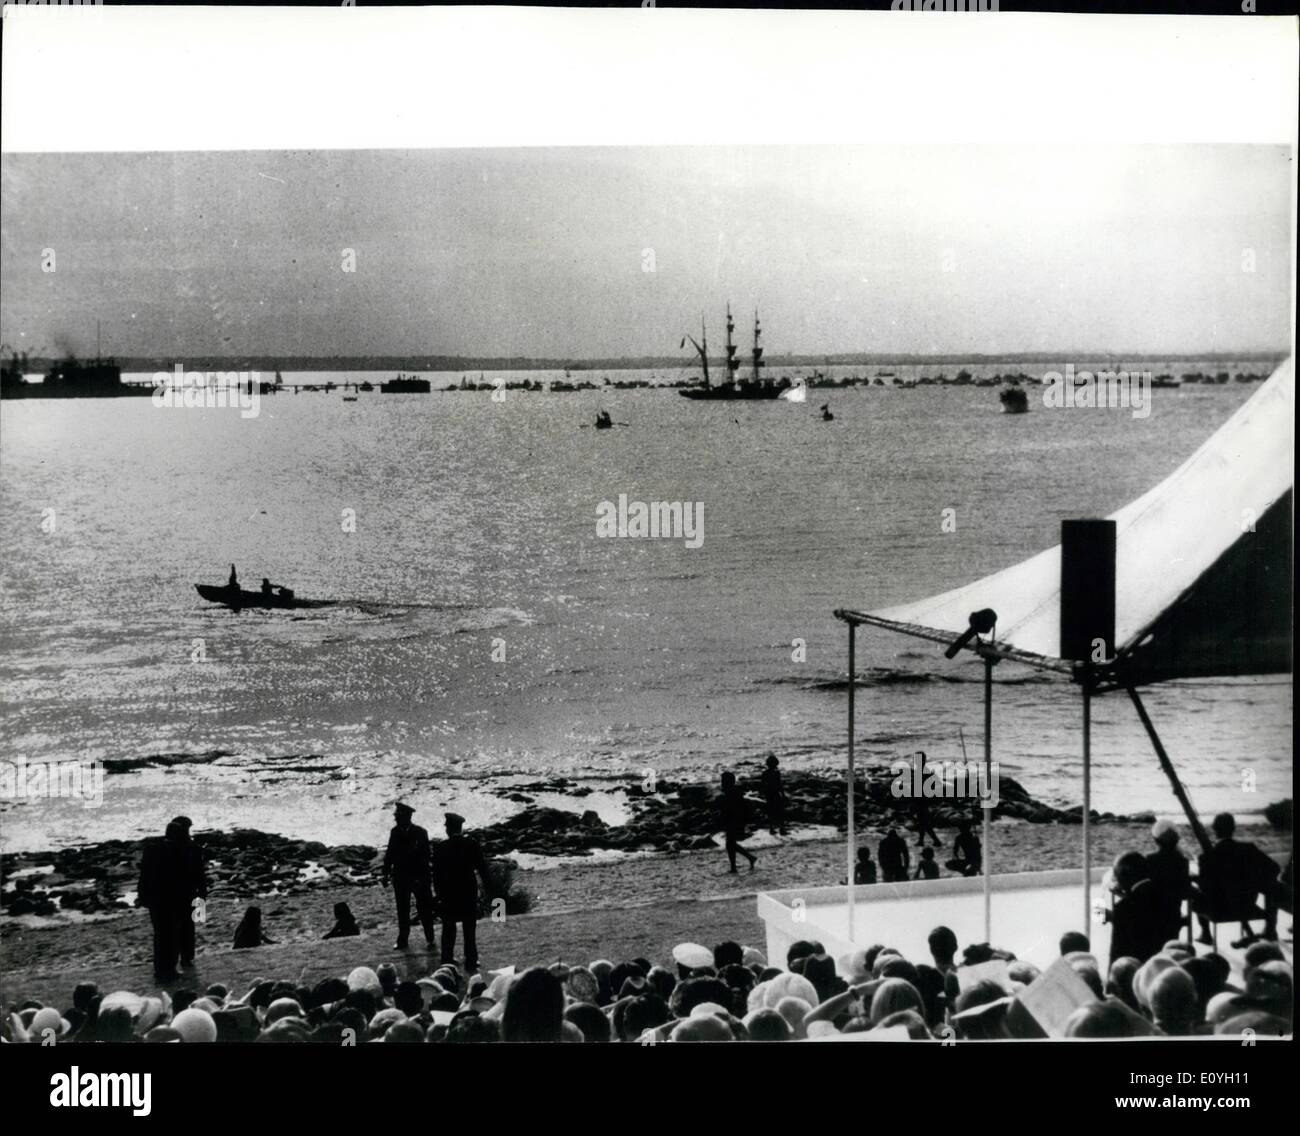 May 05, 1970 - Queen Watches Re-enactment of Captain Cook's Landing.: As the Royal Family waited to watch a re- enactment of Captain Cook's landing at Botany near Sydney, Australia pranksters in an outboard motor boat stole the show. Dressed in period costume two students raced for the shore carrying a Union Jack, chased by Police launches, and planted their flag before the official landing could get under way. The incident was watched by members of the Royal Family. Photo shows General view in Botany Bay as the students in the speedboat stole the show Stock Photo